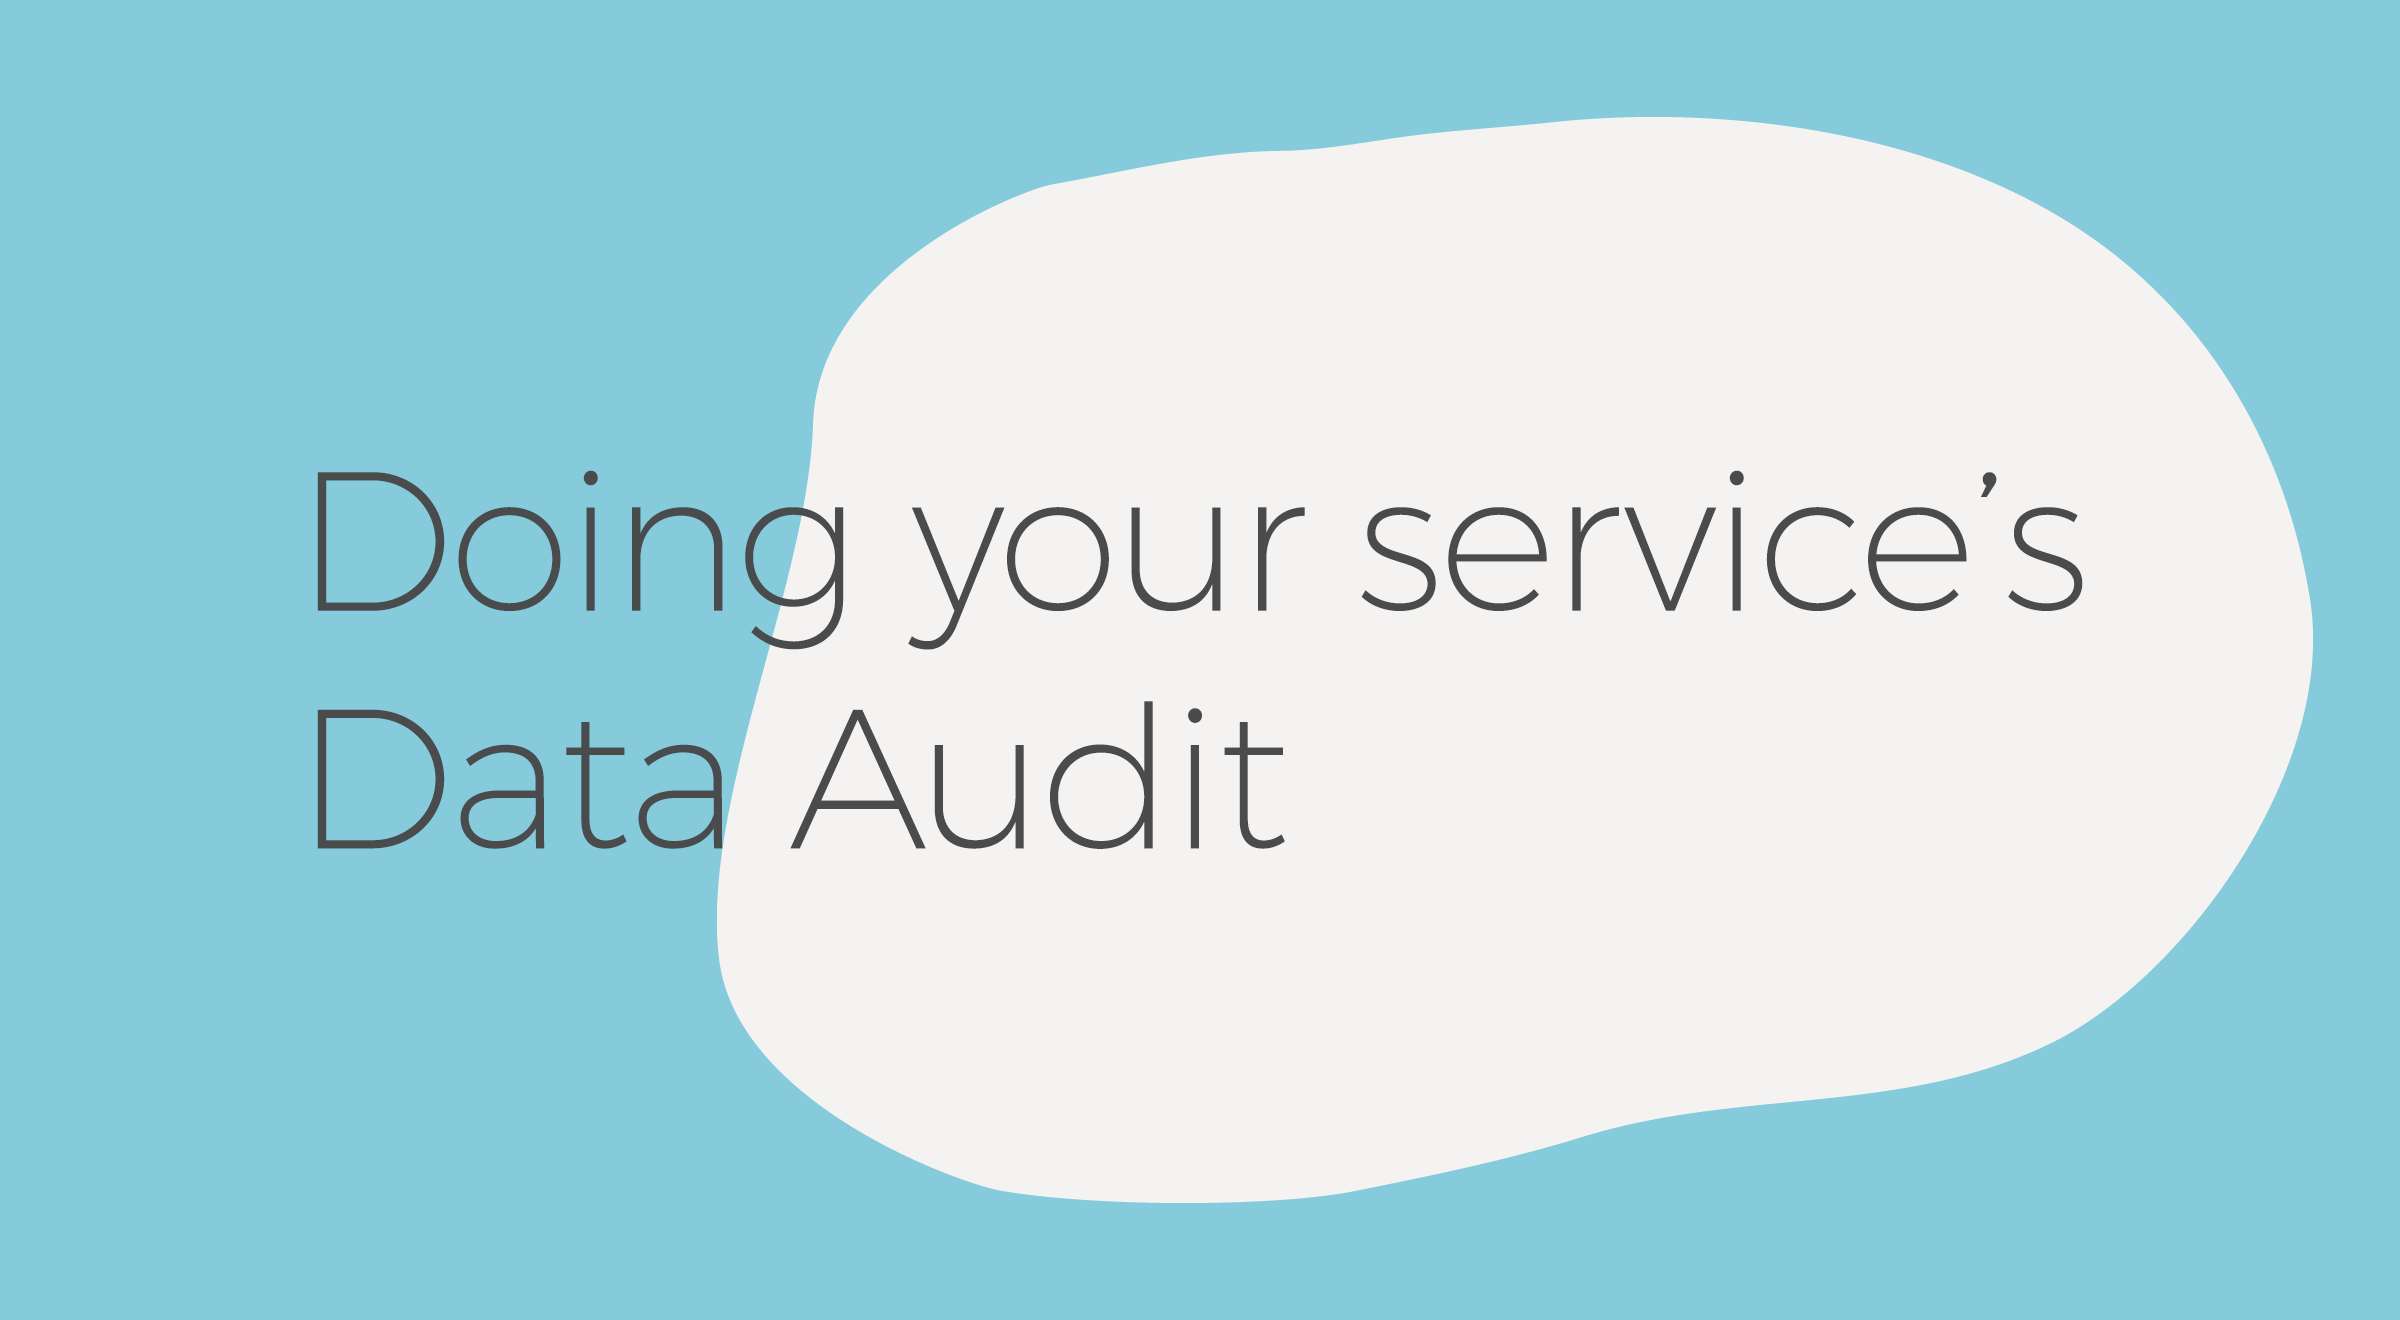 Doing your service's Data Audit